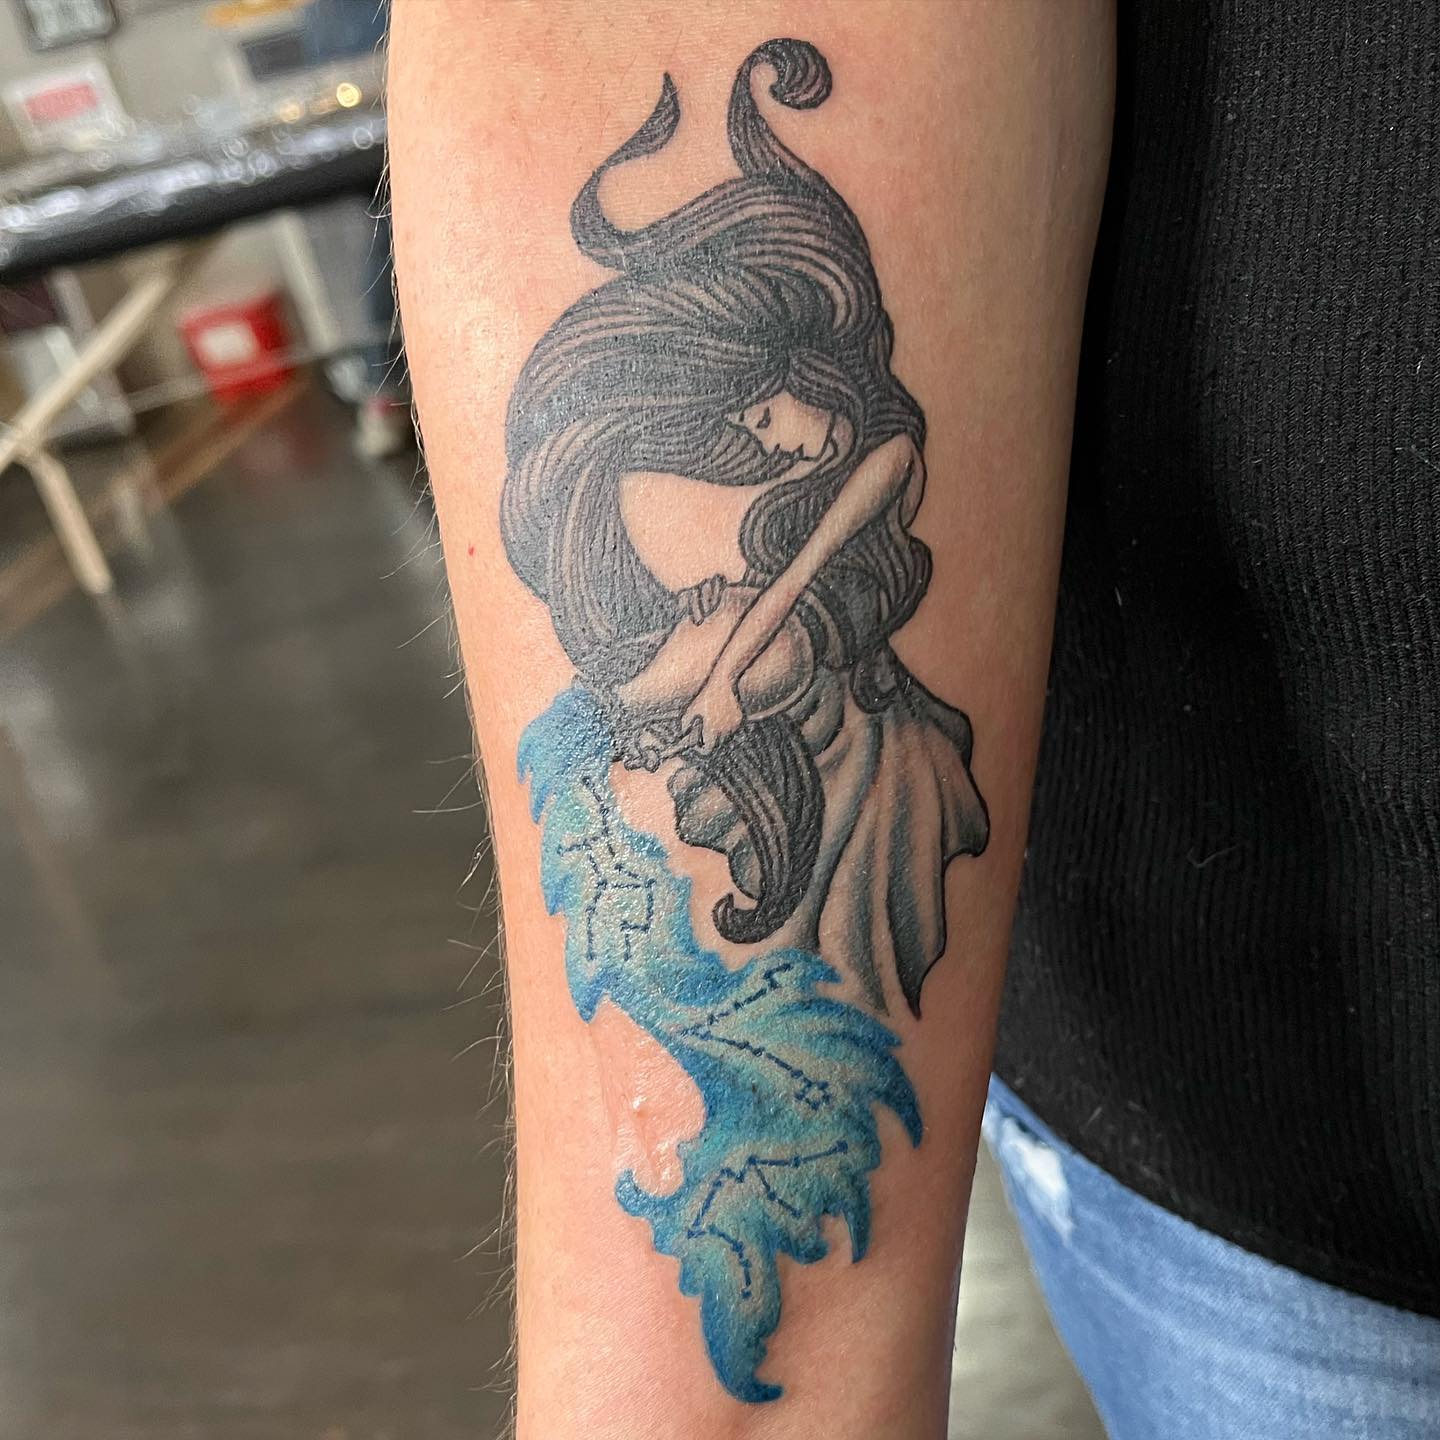 We see vessels which are full of water and a woman or boy carrying it all over the place while scrolling for an Aquarius tattoo but here is a different one for you. Inside the water she carries, there is a constellation mark of your horoscope. This is quite creative and you should give it a shot.